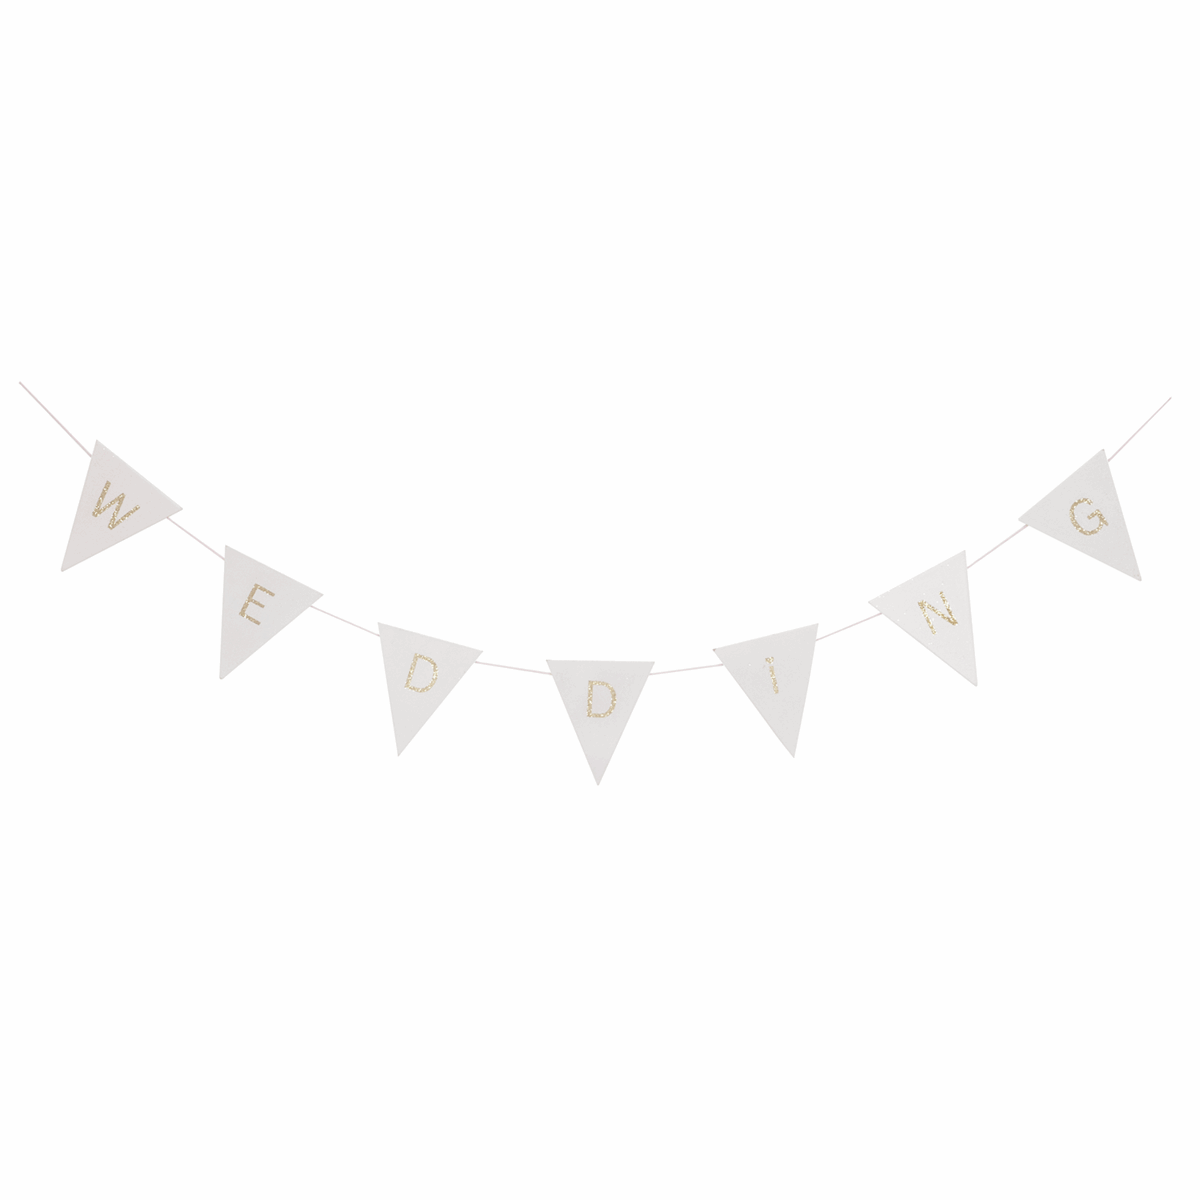 Wedding Bunting - White with Gold Glitter